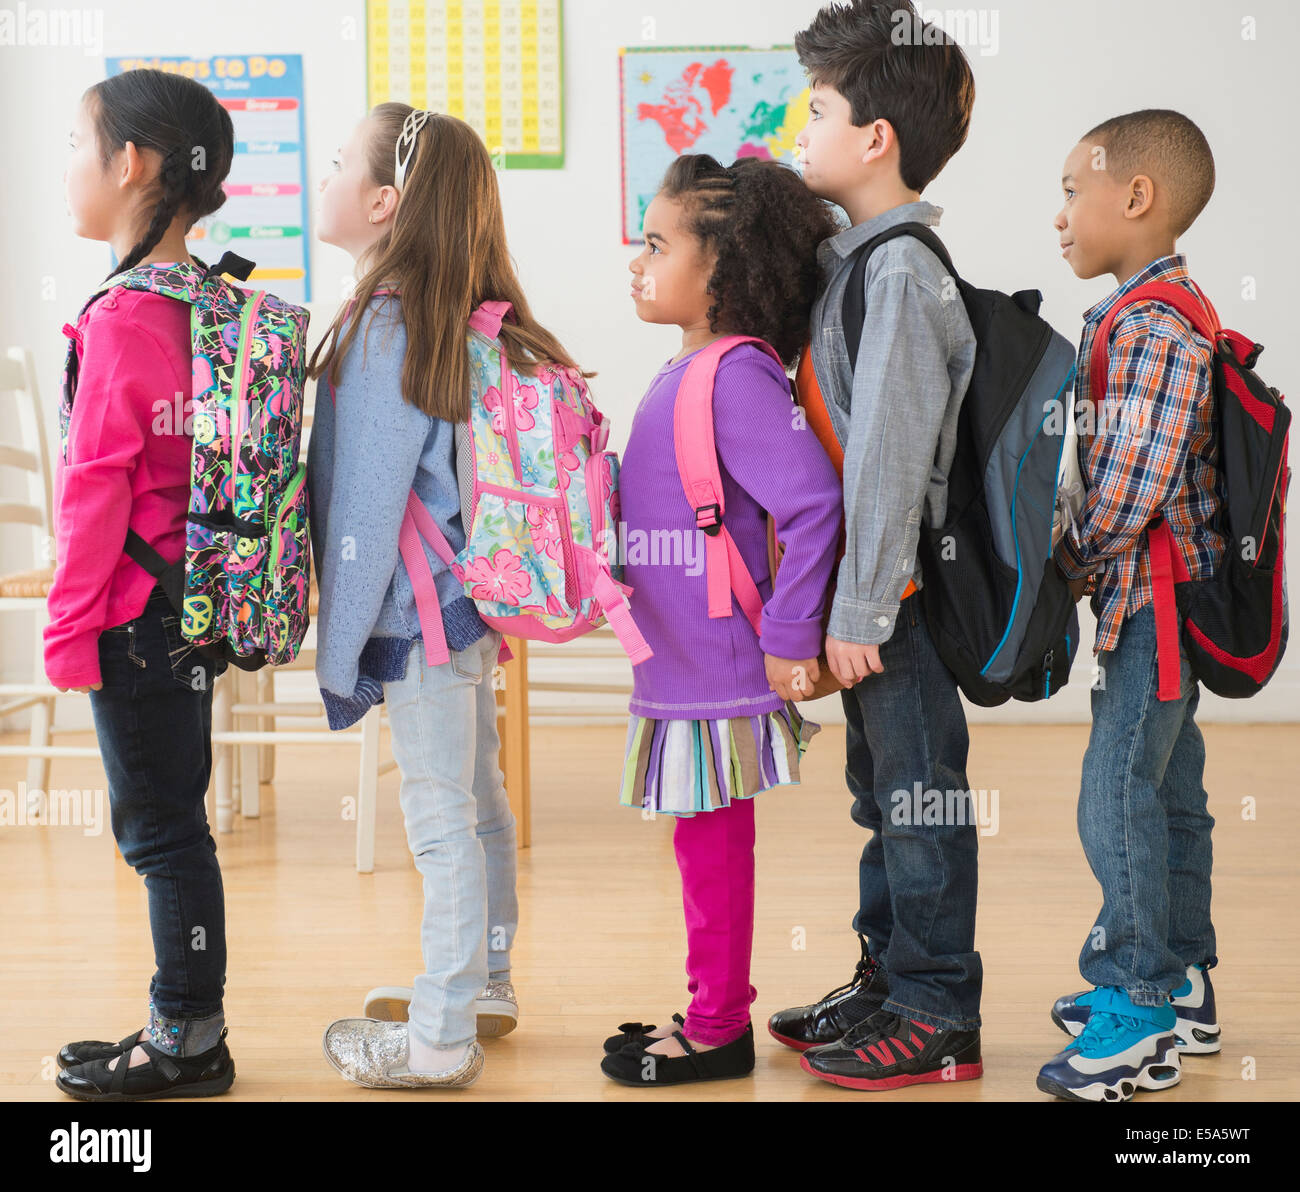 Students standing in line in classroom Stock Photo